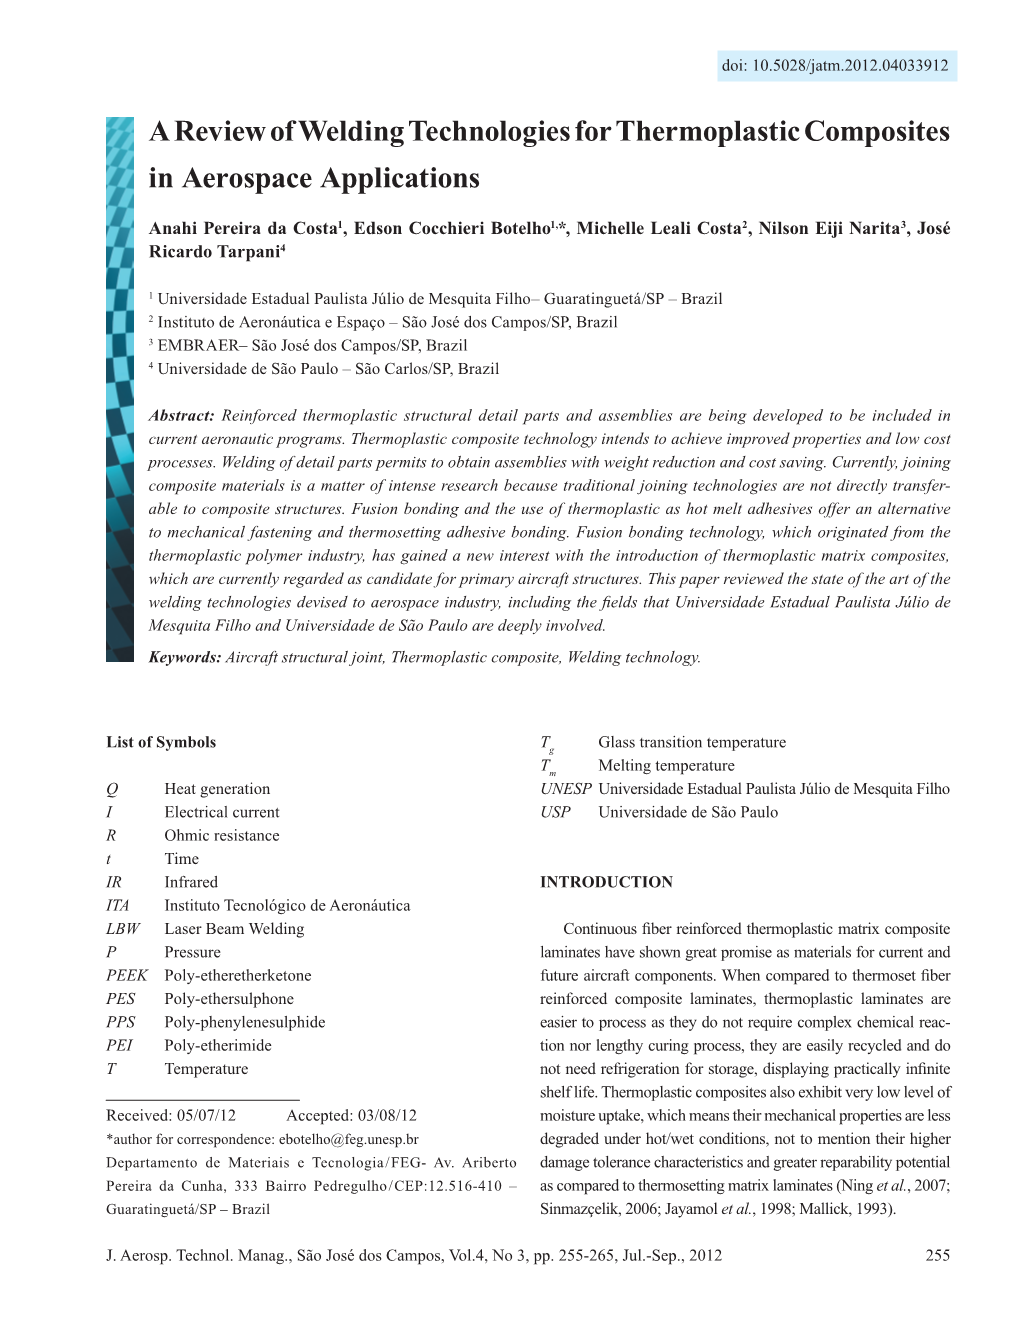 A Review of Welding Technologies for Thermoplastic Composites in Aerospace Applications